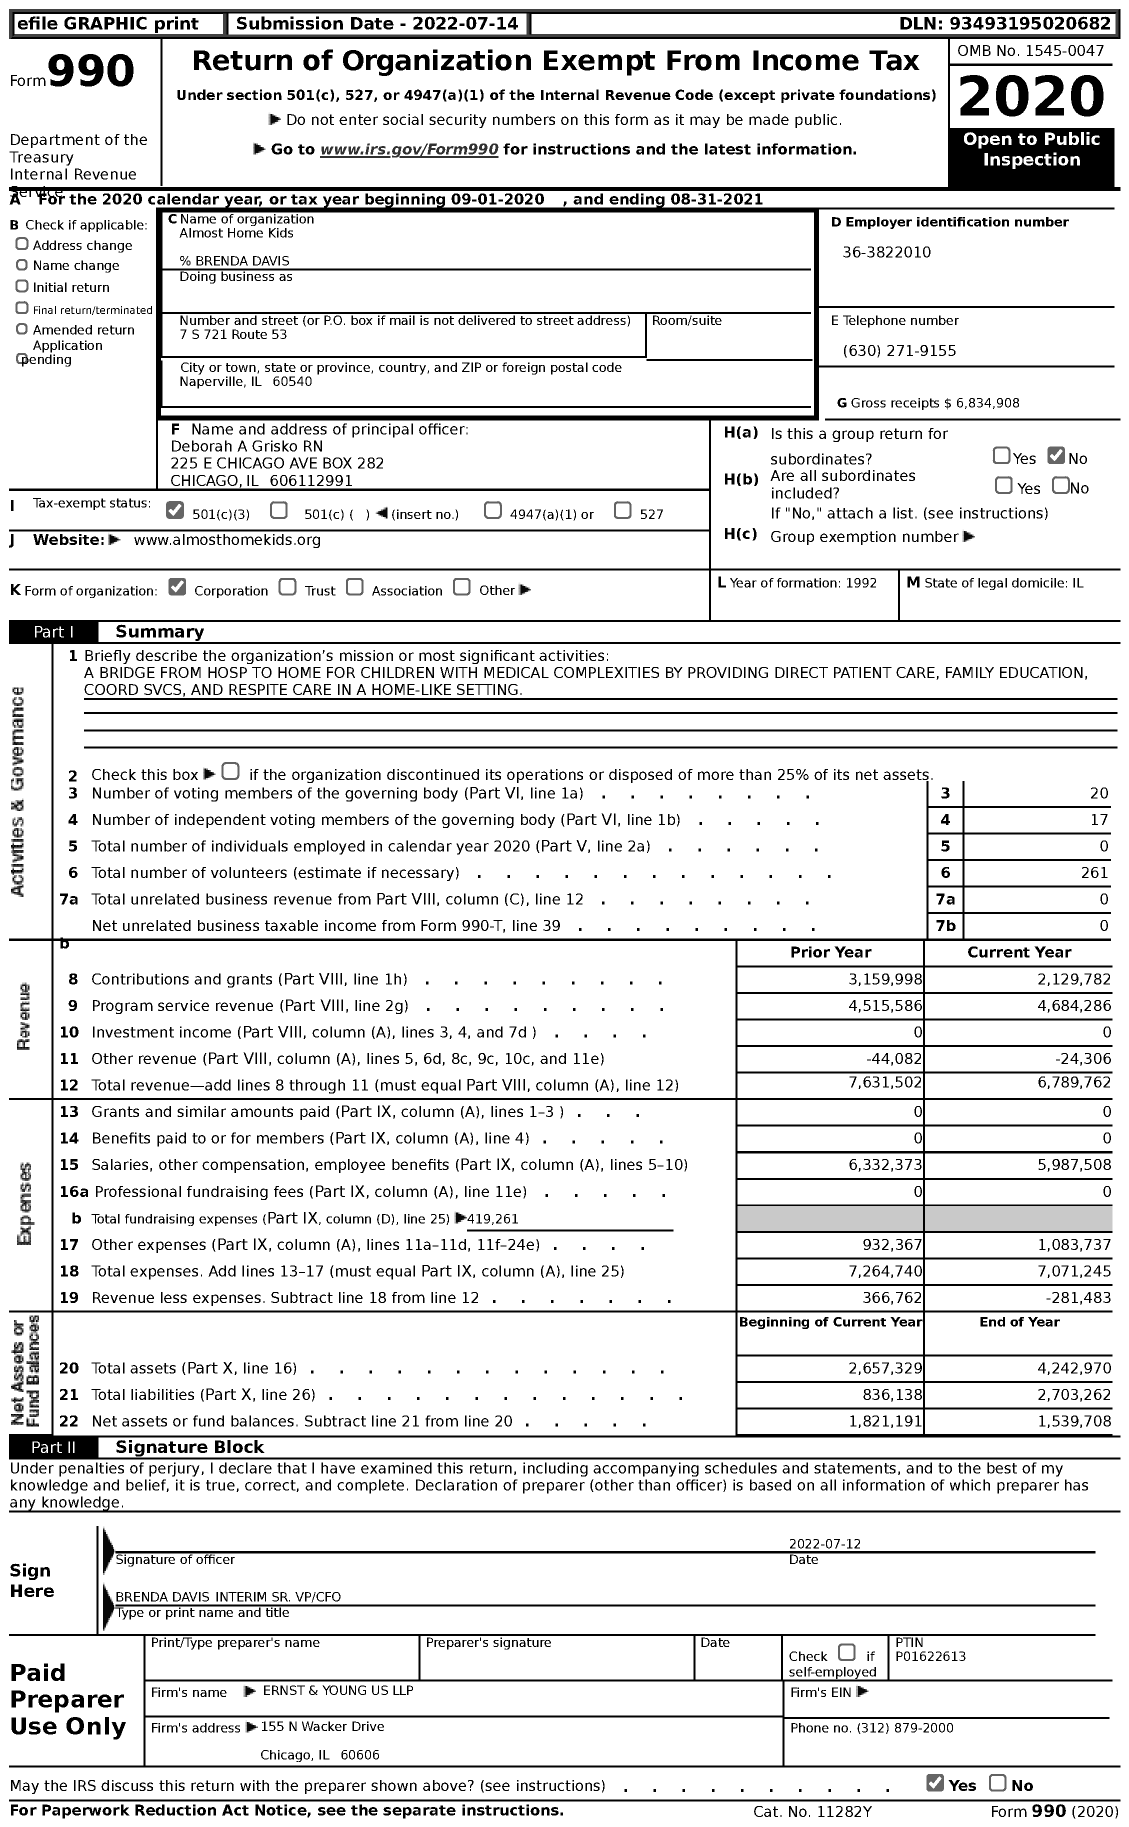 Image of first page of 2020 Form 990 for Almost Home Kids (AHK)